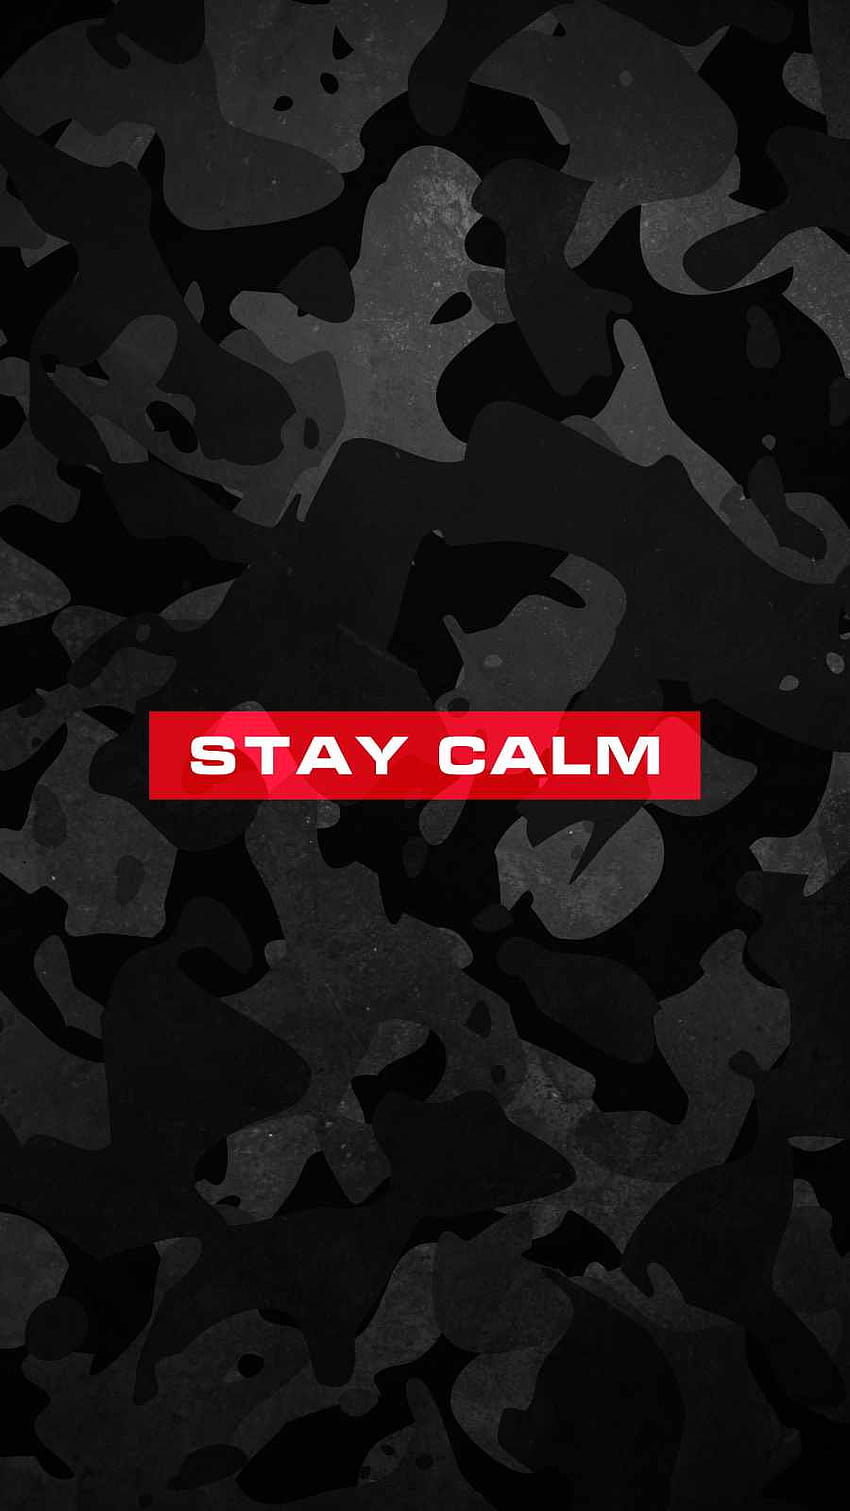 Stay Calm IPhone, stay cool HD phone wallpaper